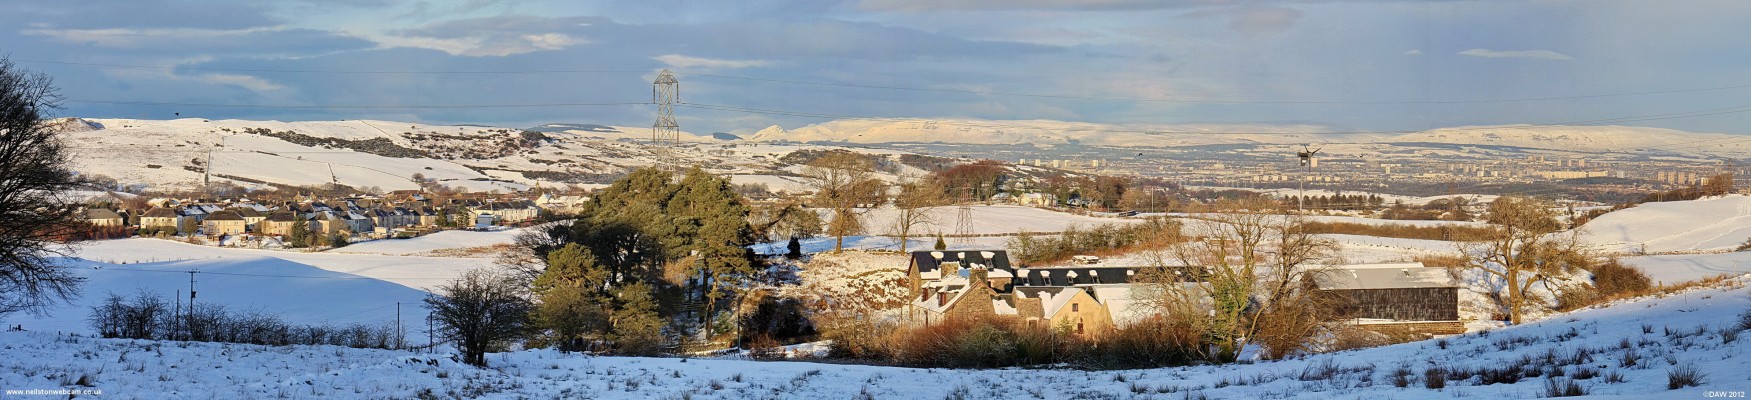 Panoramic view from above Craig of Neilston Farm
On the left are the Fereneze Hills with Neilston below, in the distance lies the City of Glasgow with the Kilpatrick hills and Kilsyth hills behind.  [url=http://www.streetmap.co.uk/map.srf?X=247842&Y=655755&A=Y&Z=115/] Map location. [/url]
